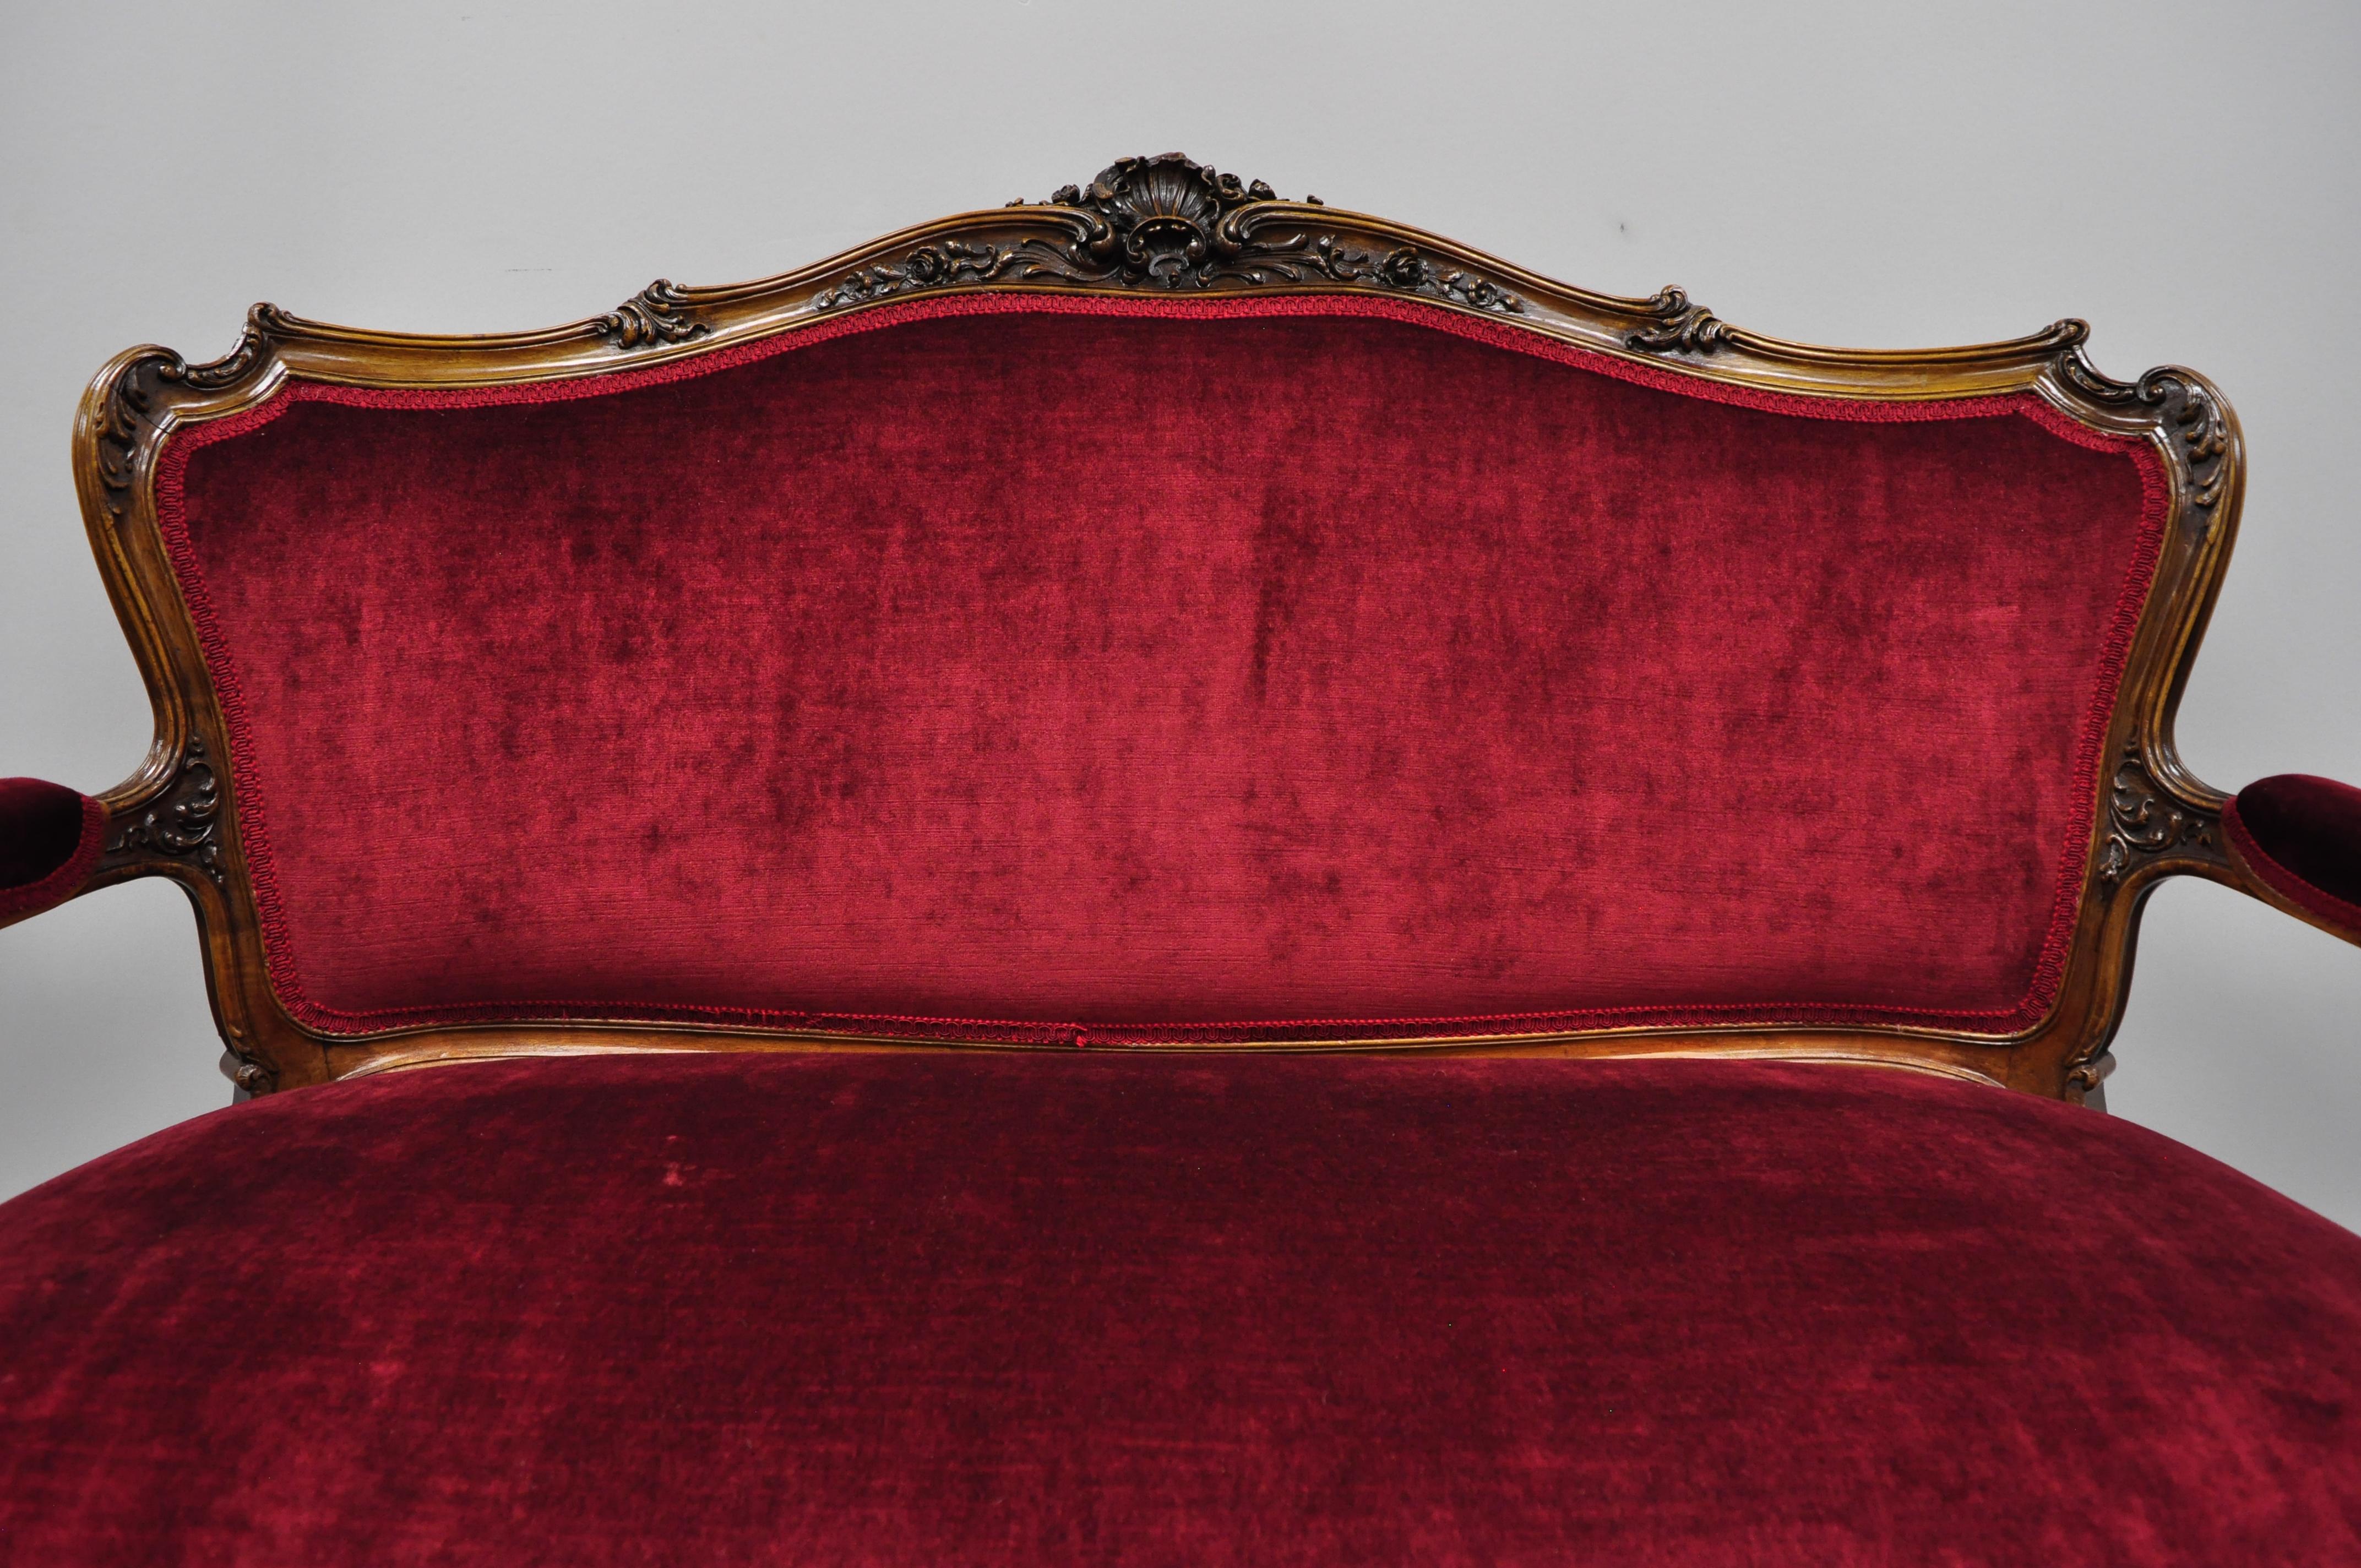 Early 20th century French Louis XV style shell carved mahogany sofa settee in red fabric. Item features shell carved top rail, solid wood construction, beautiful wood grain, upholstered armrests, cabriole legs, very nice antique item, circa early